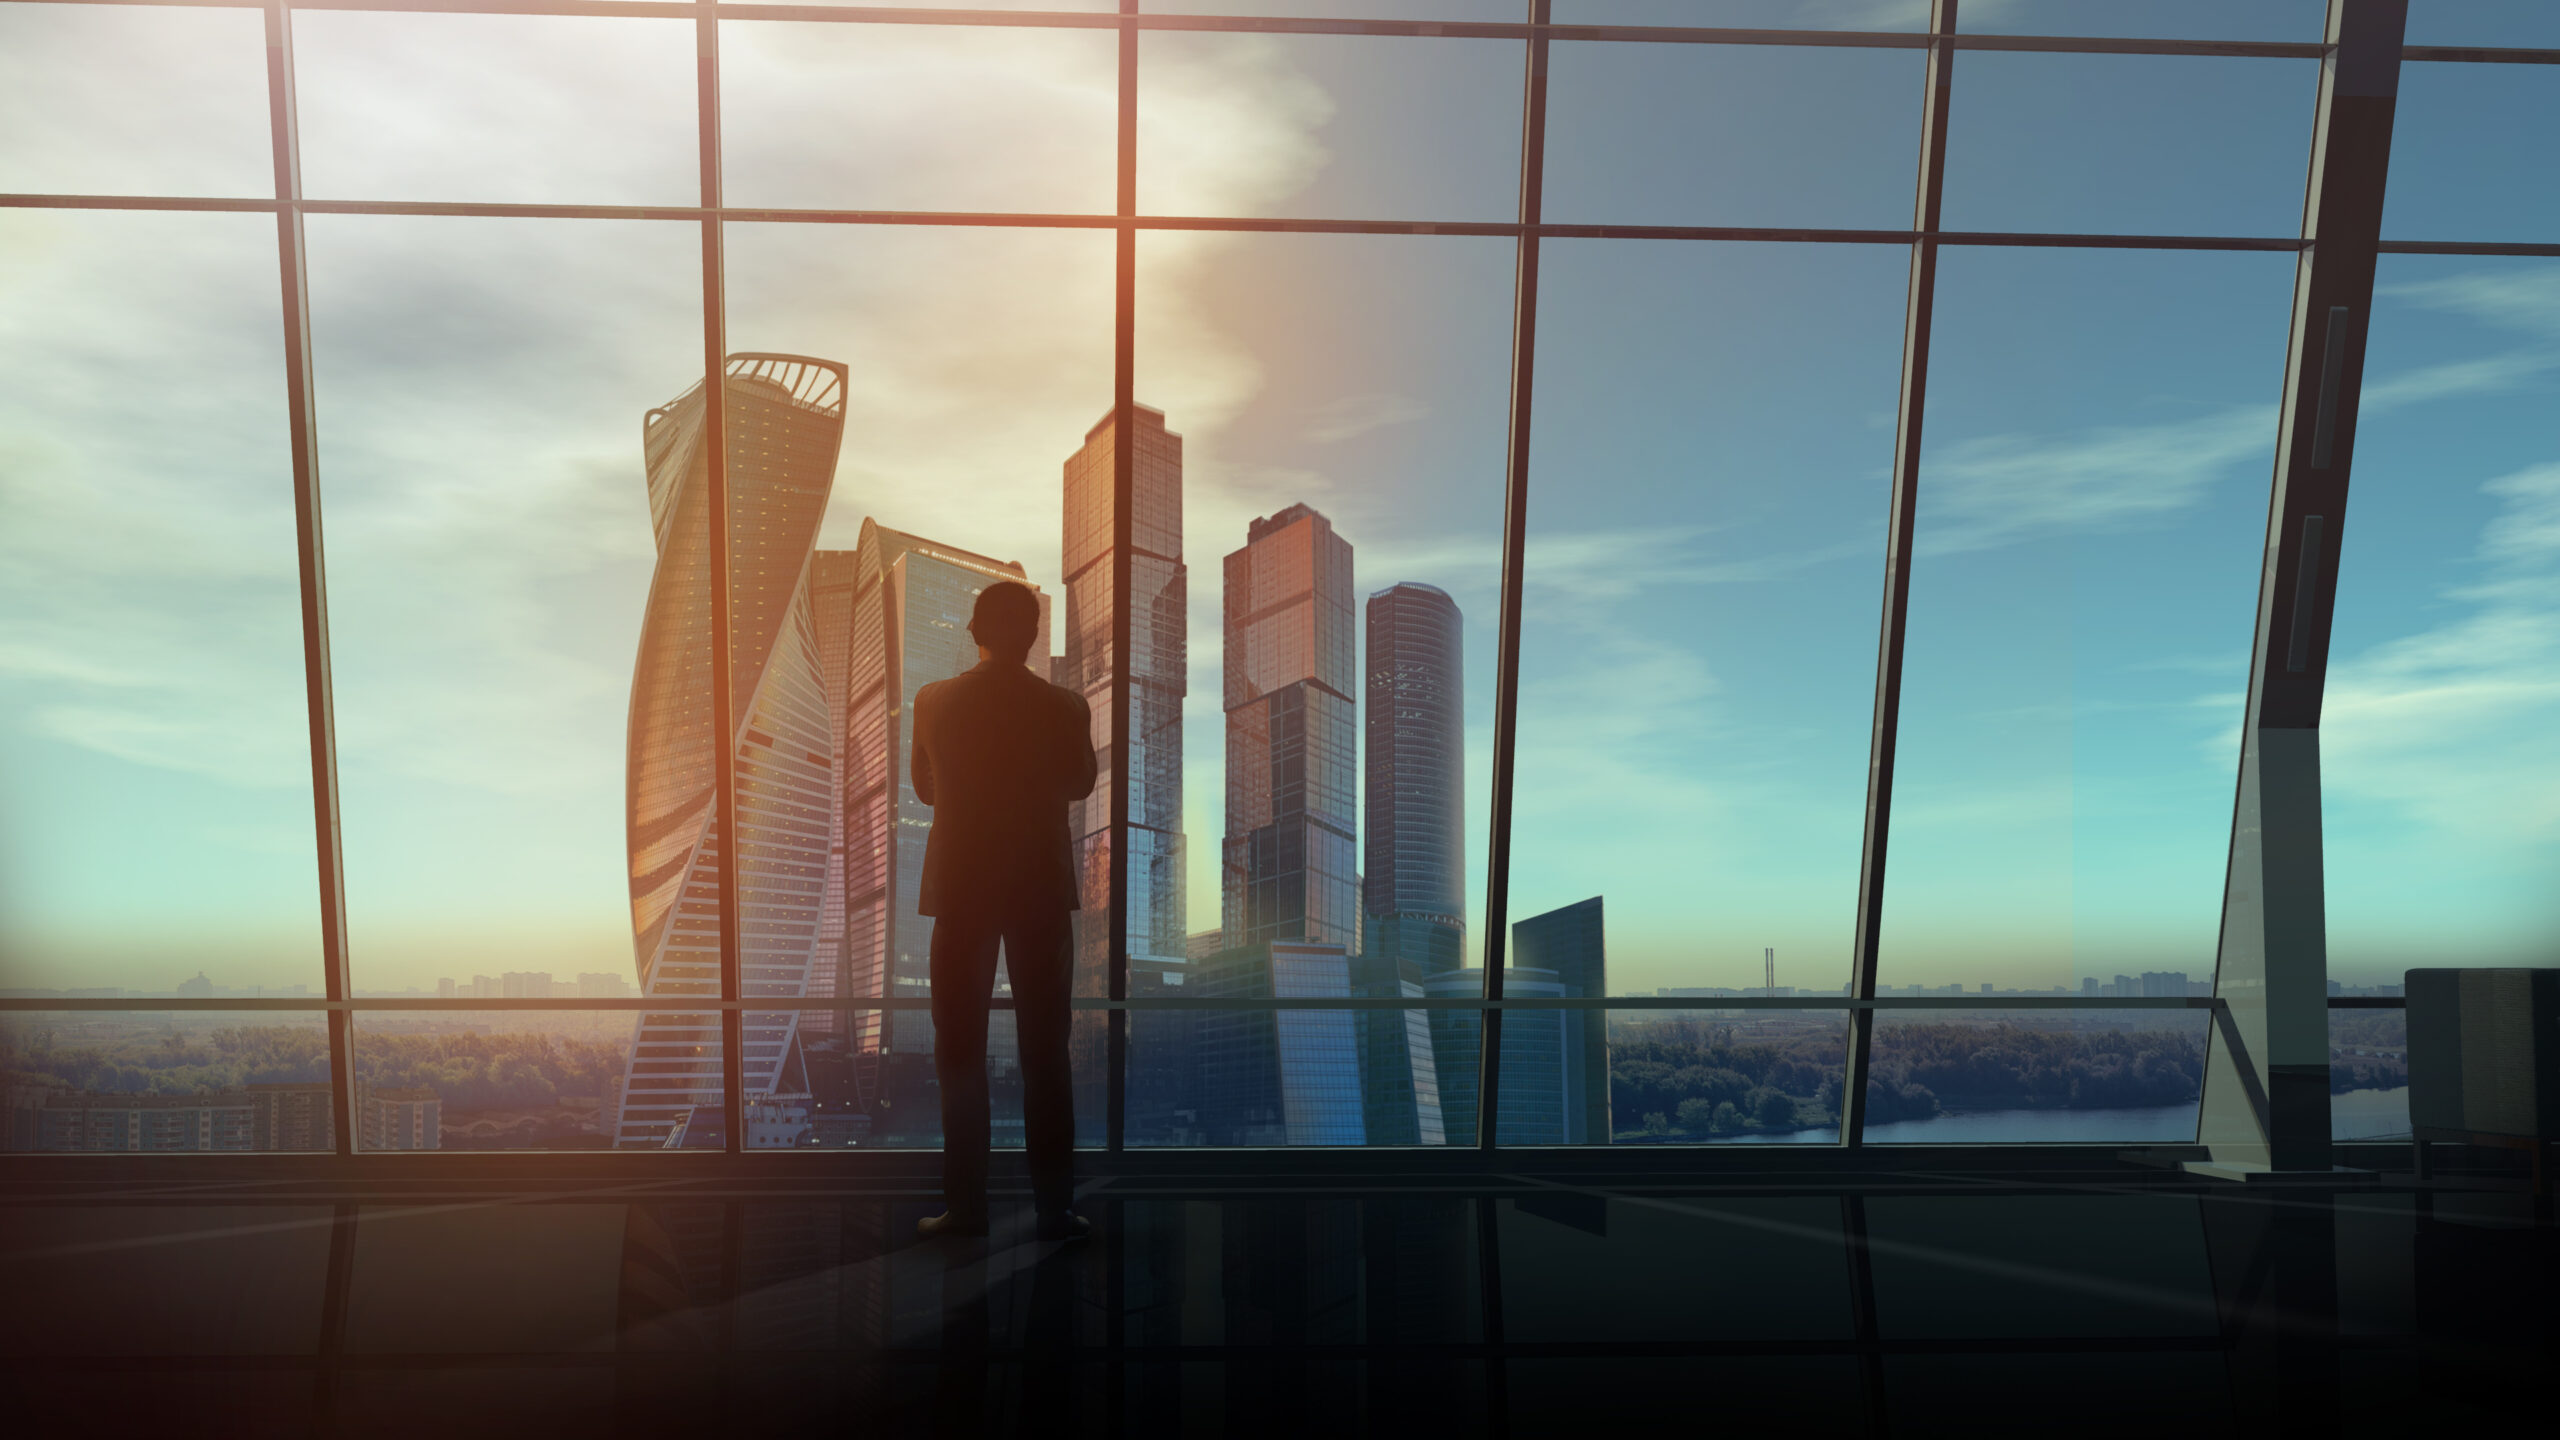 A businessman is standing in his office against the backdrop of a huge window overlooking skyscrapers.